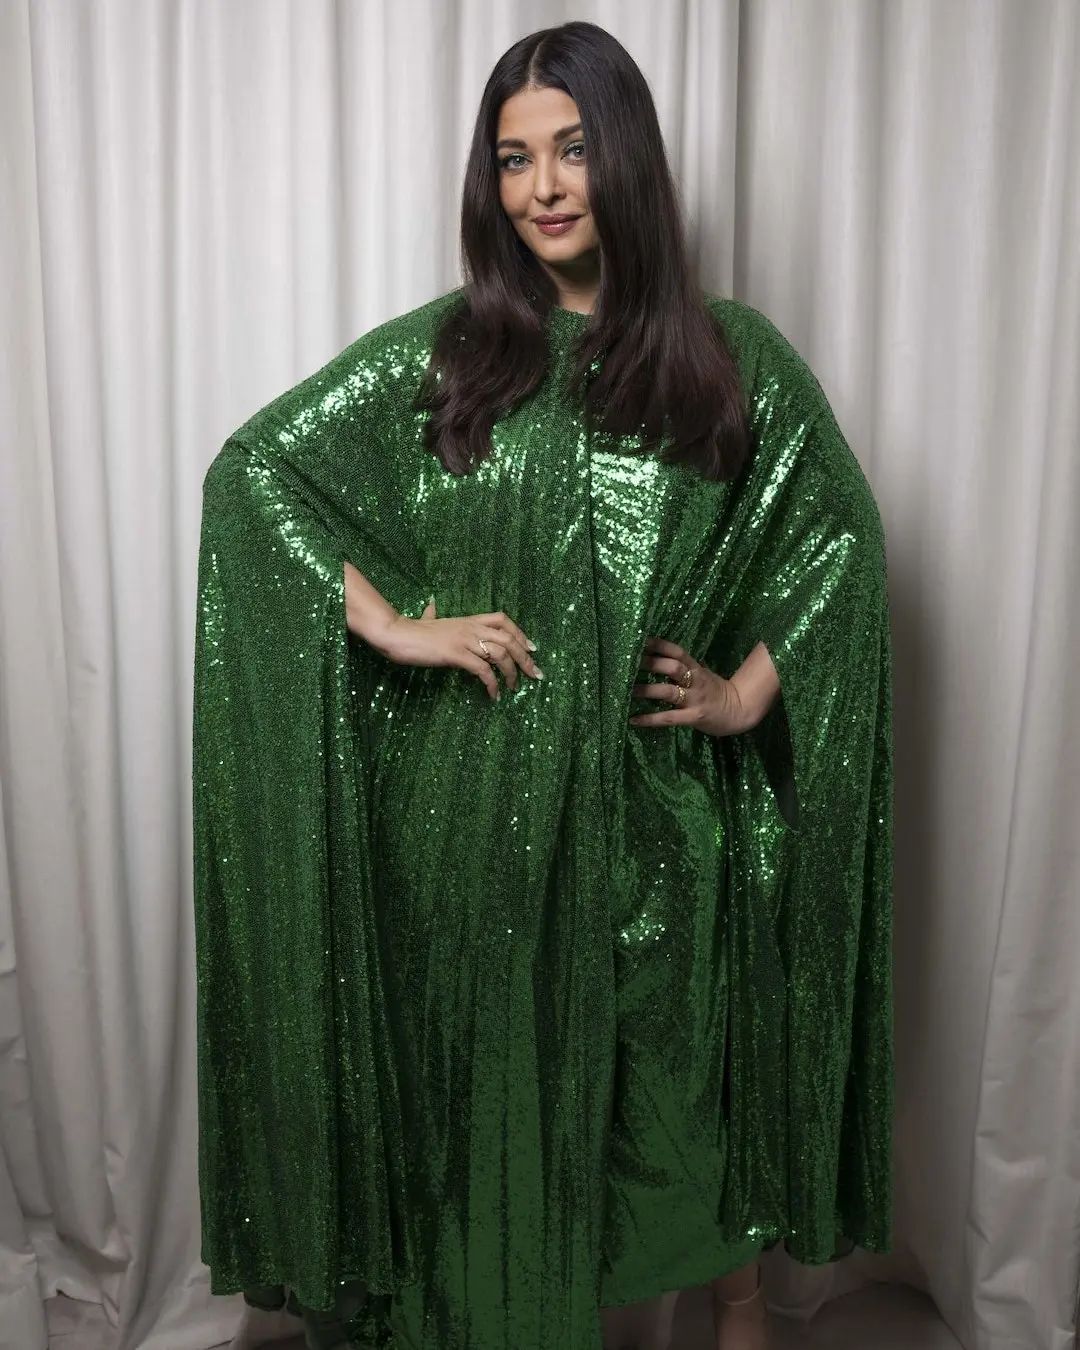 India at Cannes Aishwarya Rai Bachchan First Look in Green Sequined